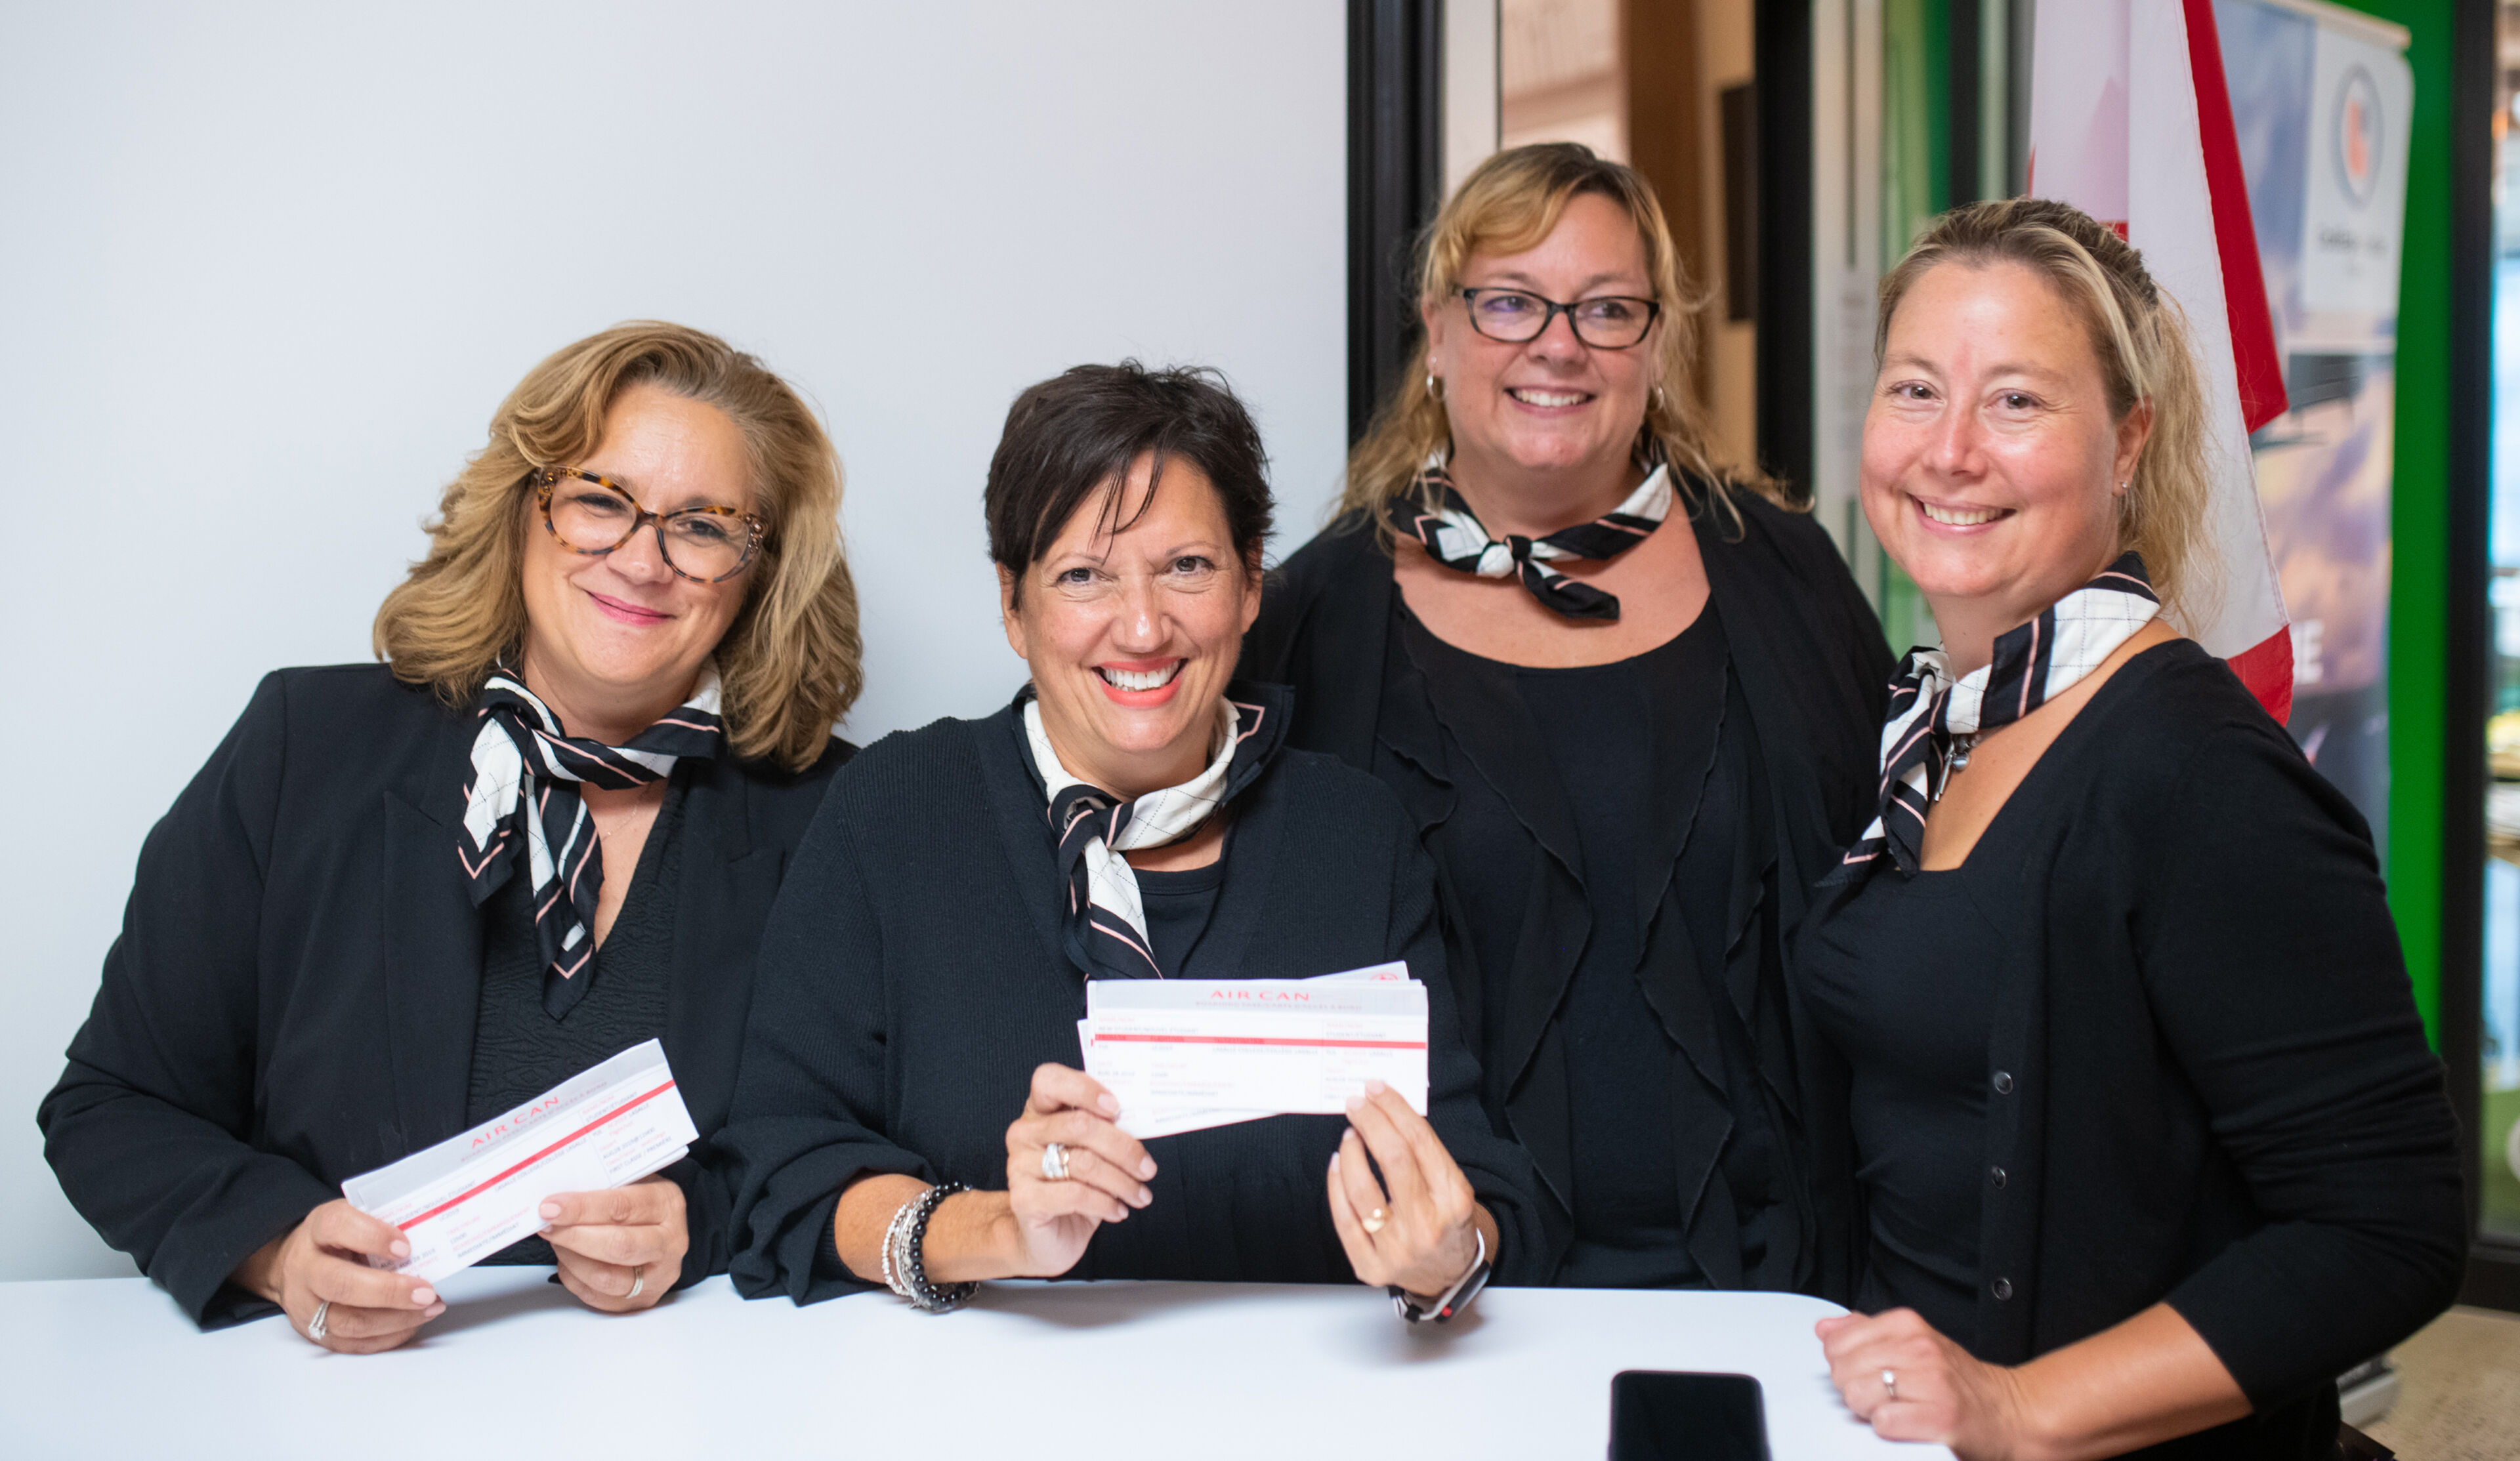 Four cheerful female hosts at a corporate event, wearing black uniforms with matching scarves, displaying event passes.